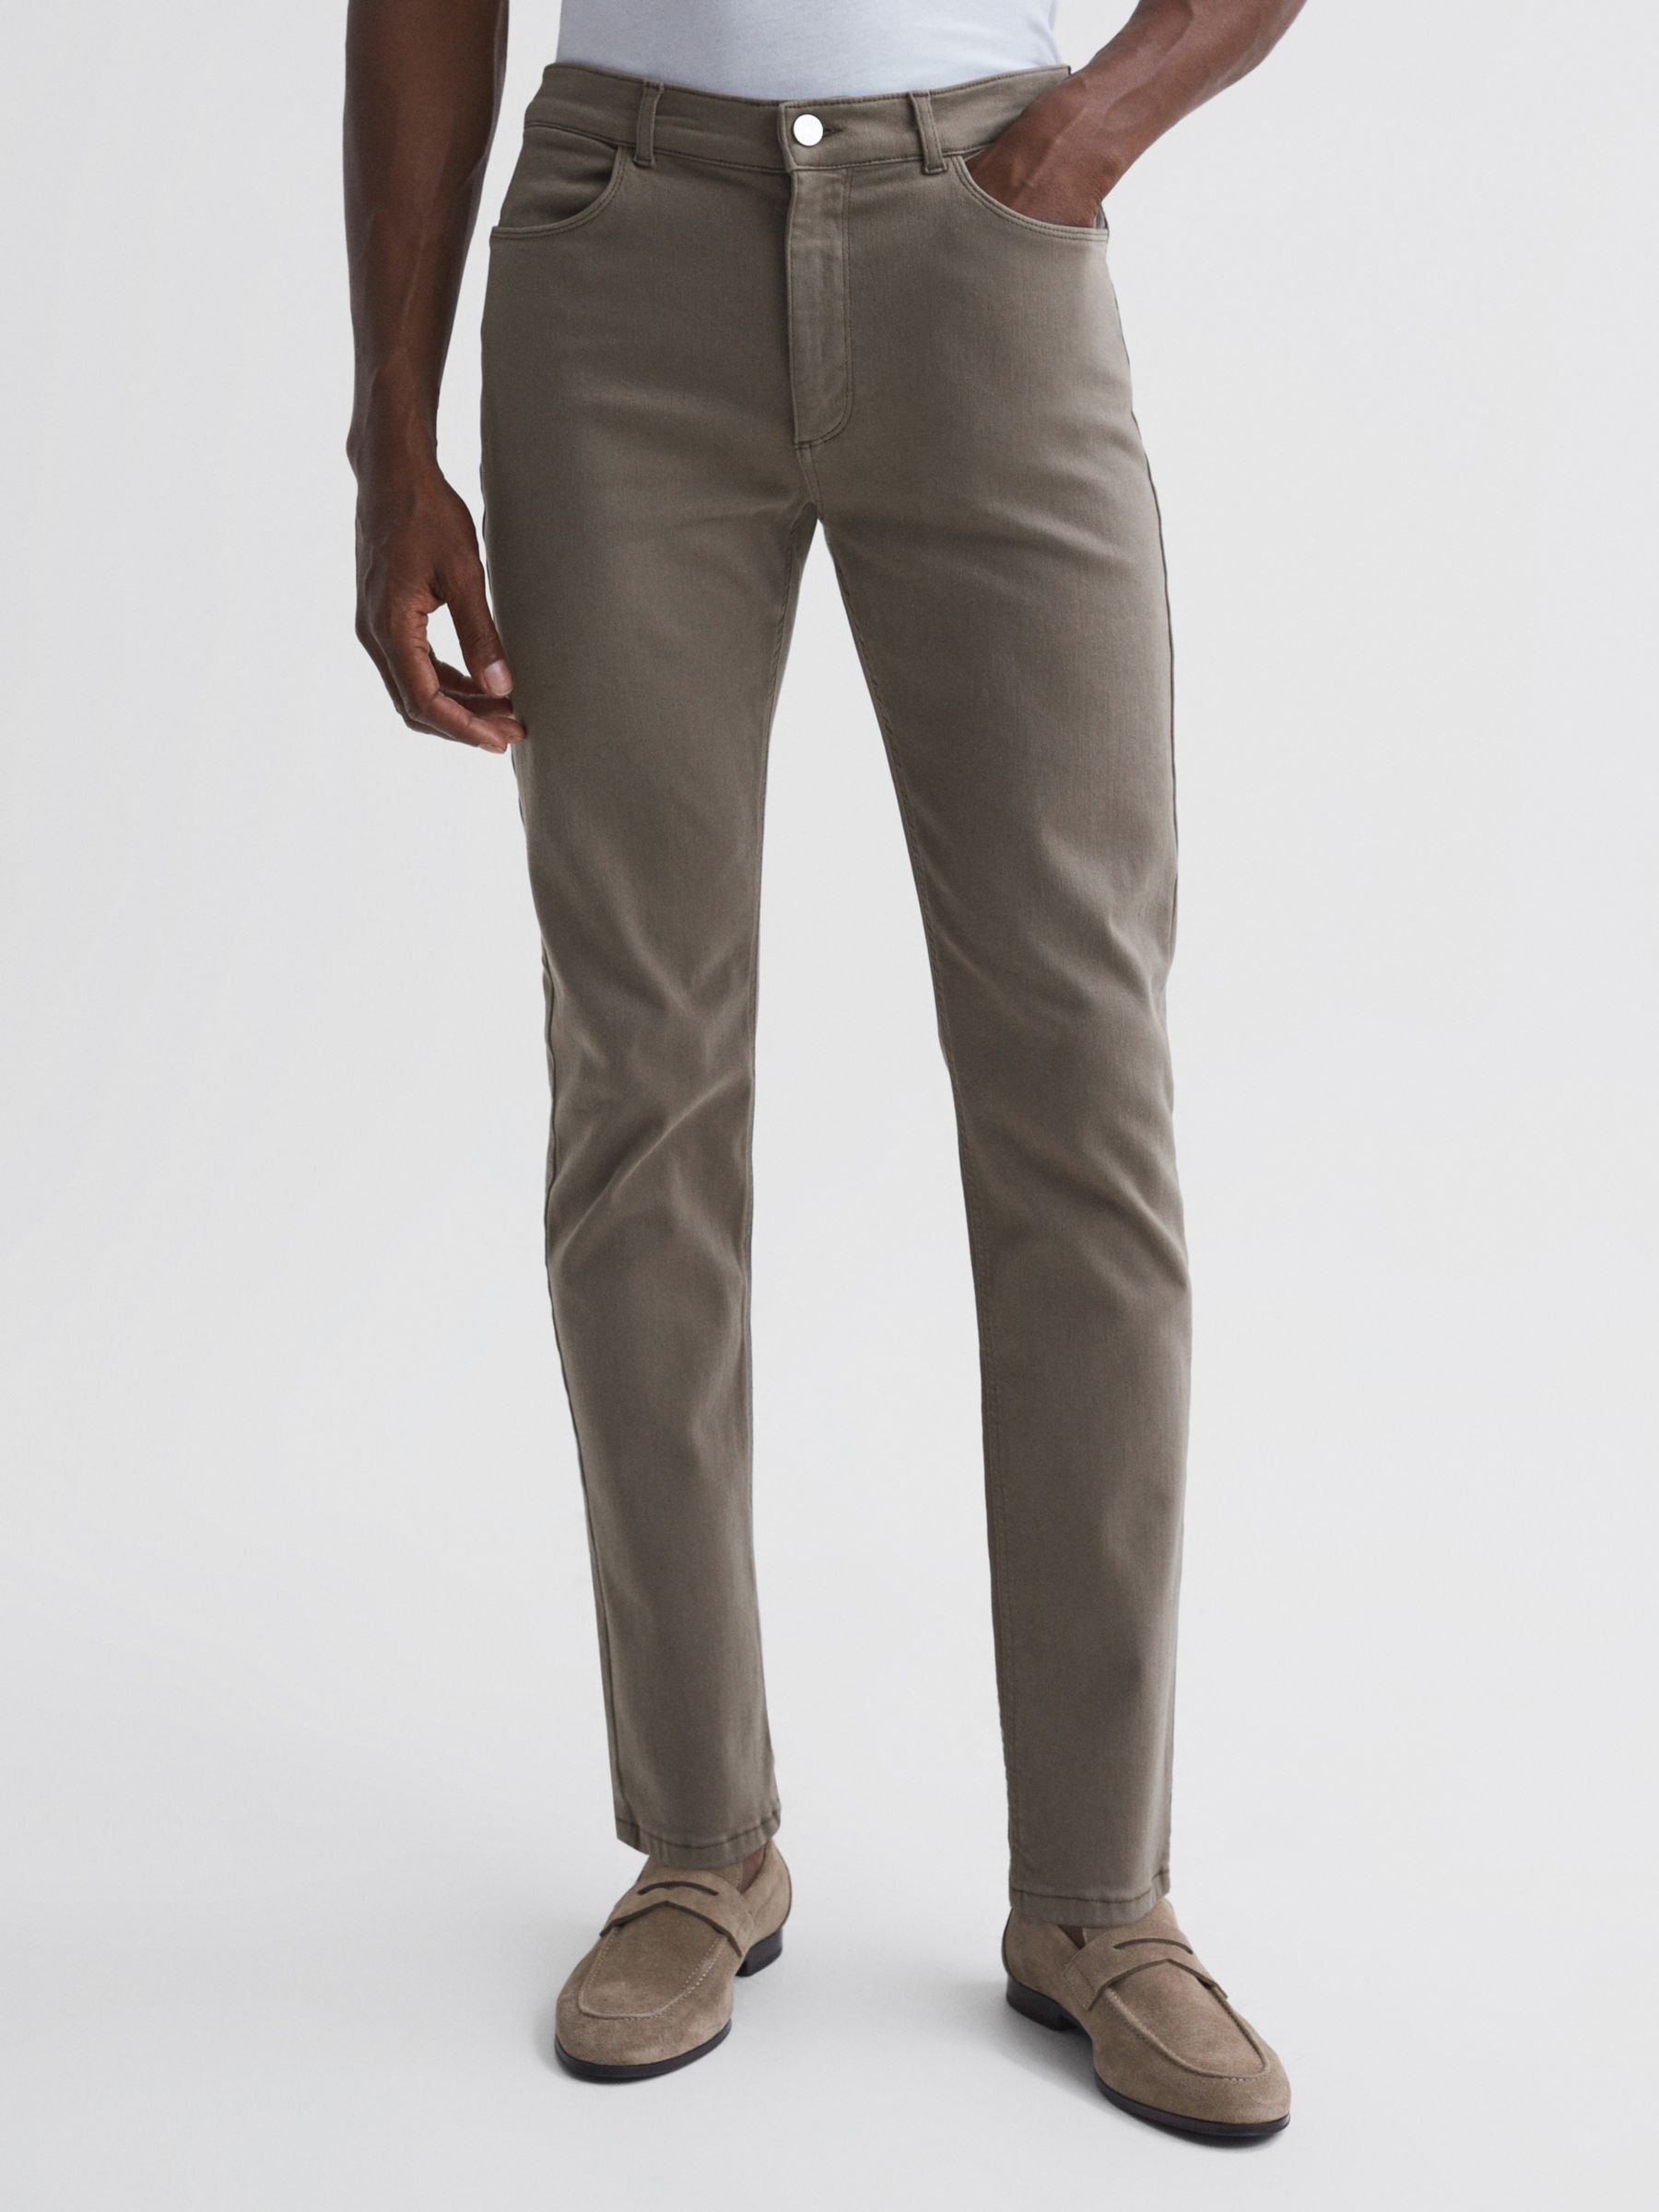 Reiss Dover Slim Fit Brushed Jeans at John Lewis & Partners